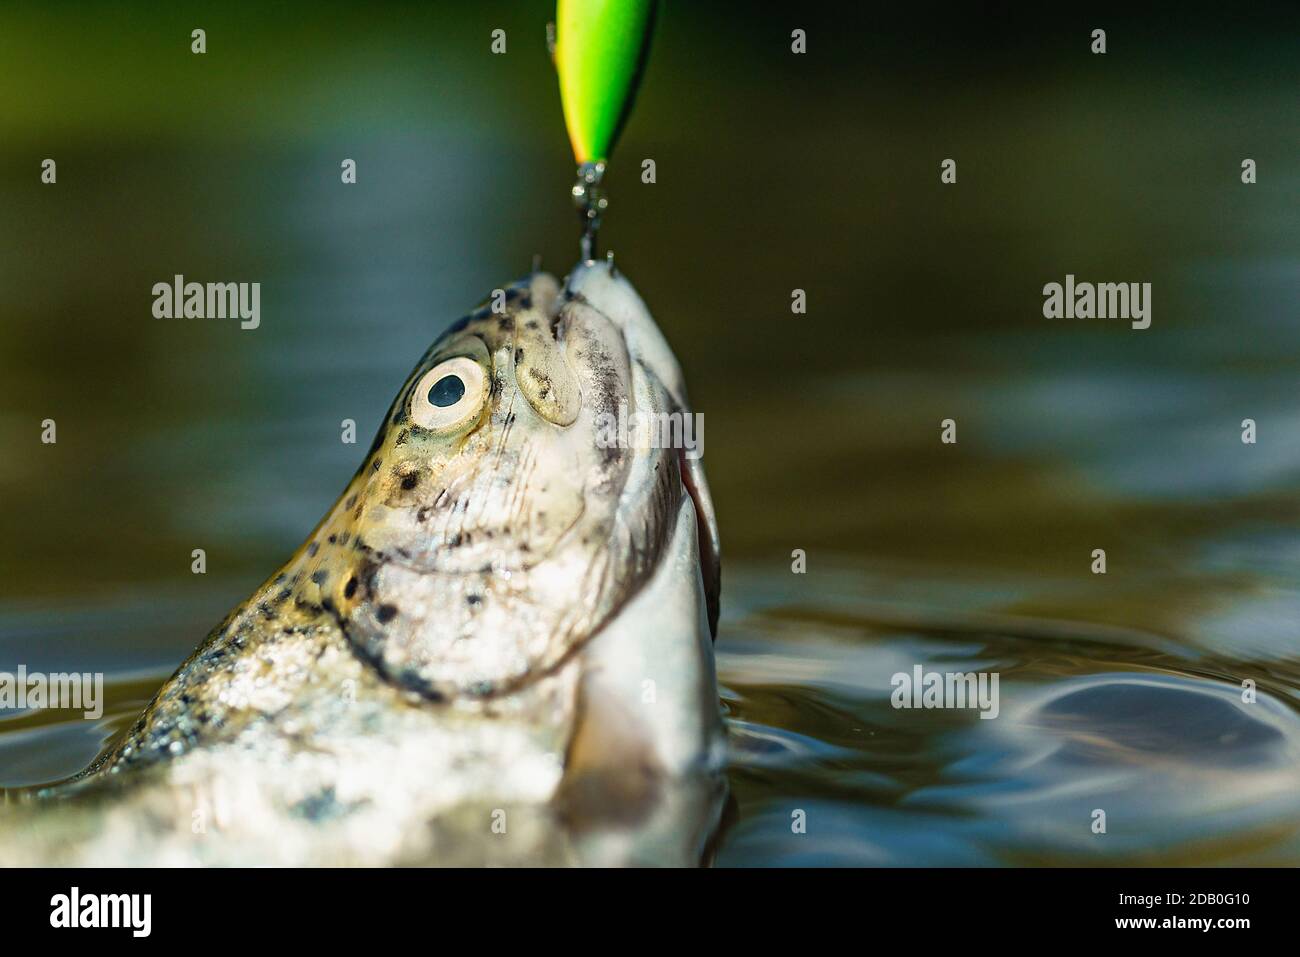 https://c8.alamy.com/comp/2DB0G10/fishing-with-spinning-reel-brown-trout-being-caught-in-fishing-net-trout-lure-fishing-fishing-relaxing-and-enjoying-hobby-2DB0G10.jpg